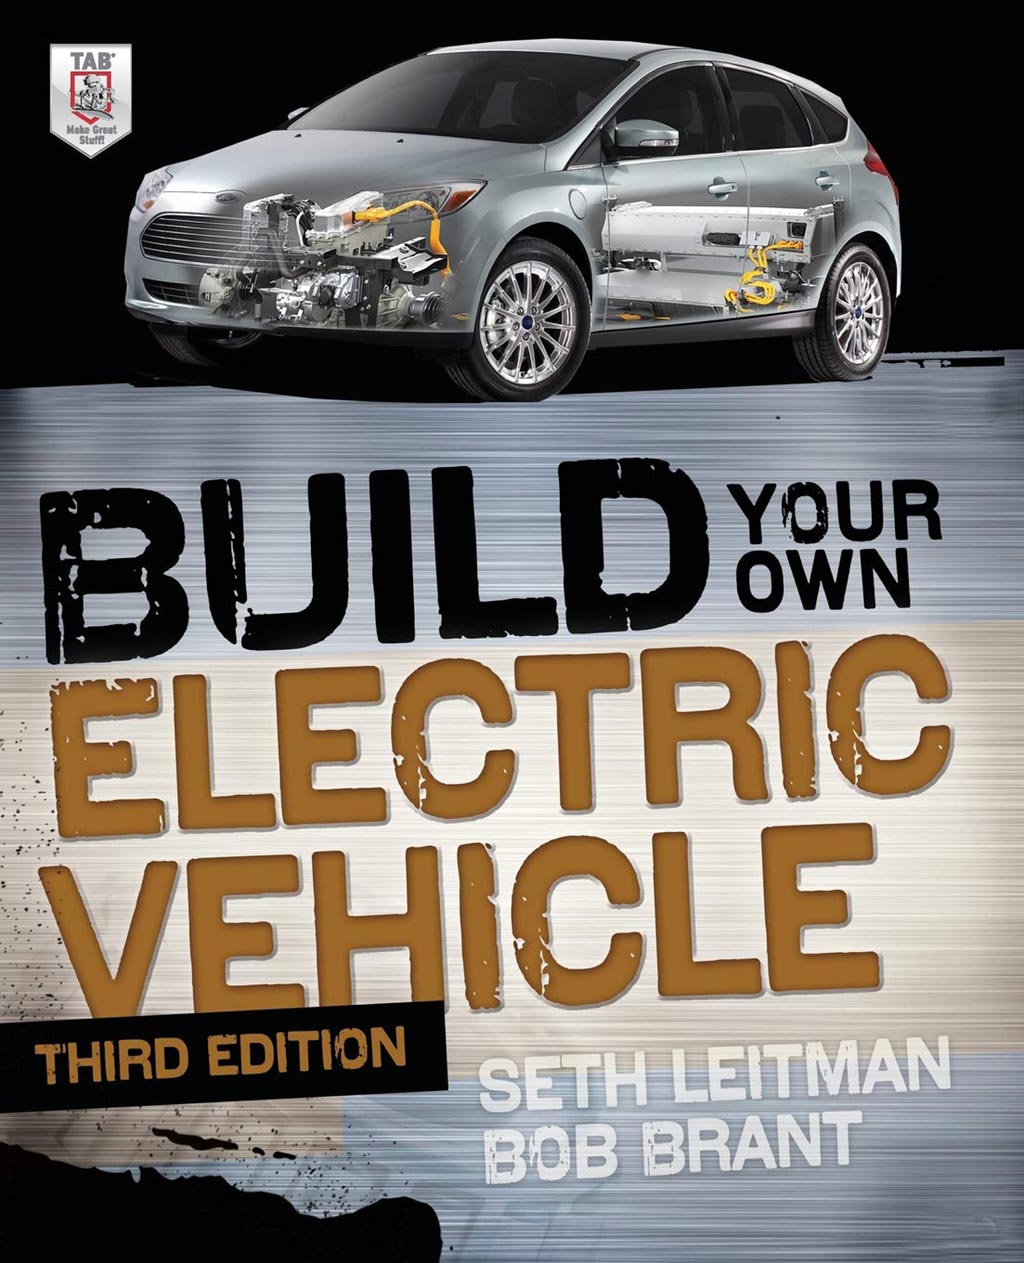 BUILD YOUR OWN ELECTRIC VEHICLE. BY LEITMAN AND BRANT